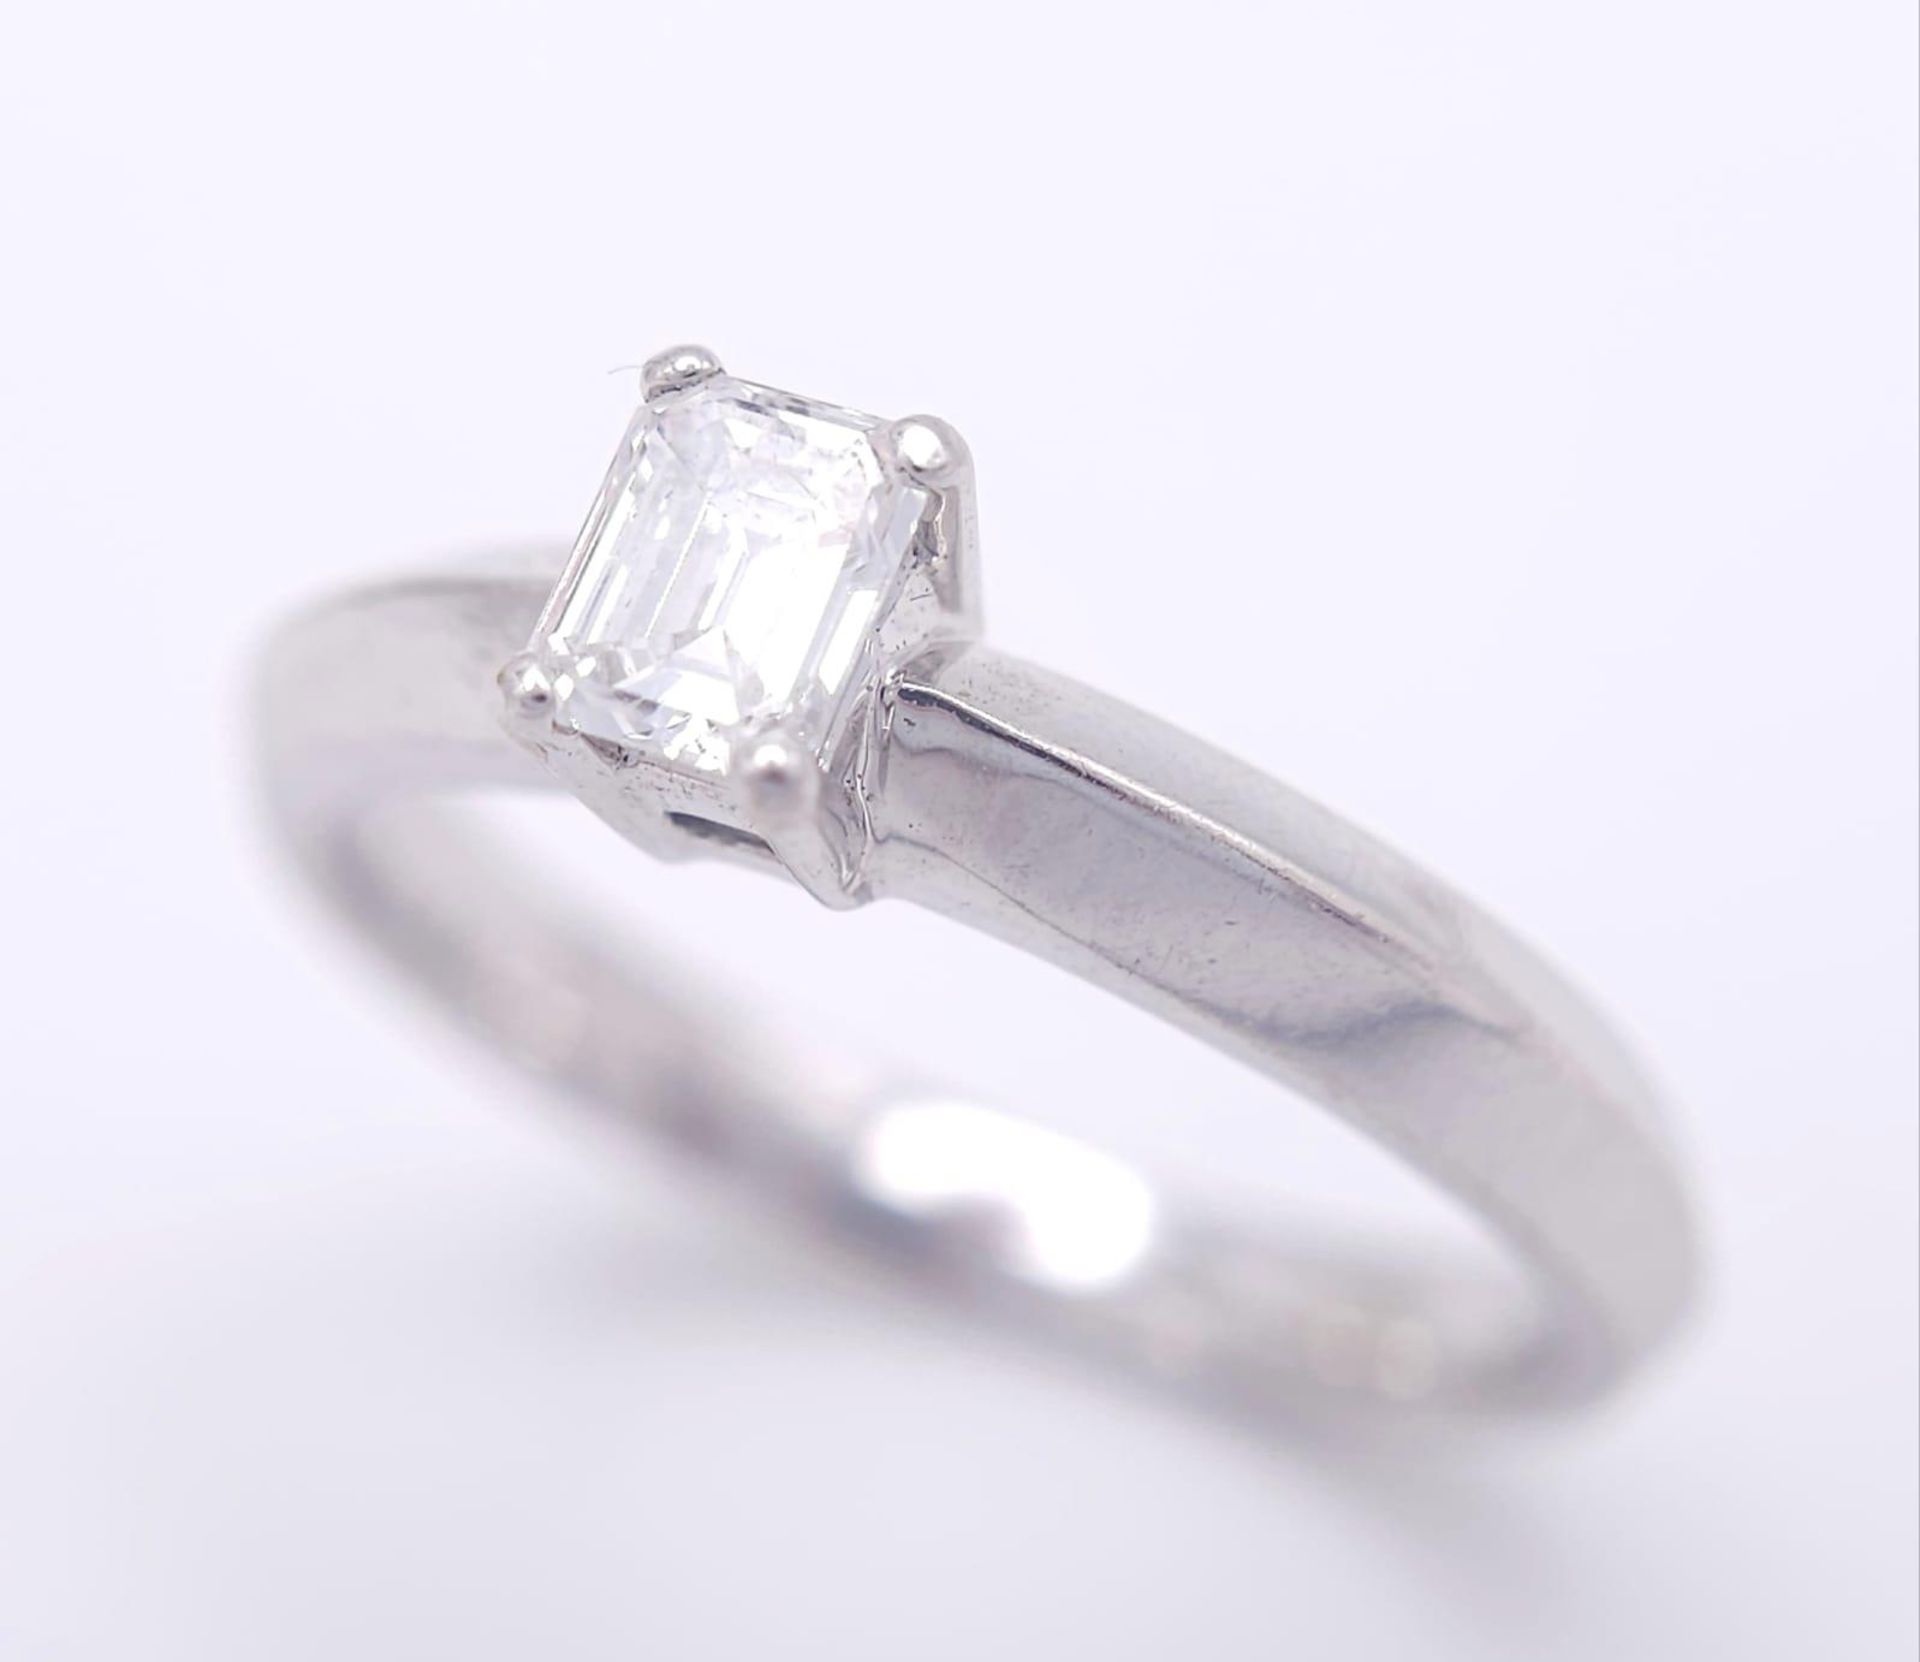 AN 18K WHITE GOLD EMERALD CUT DIAMOND SOLITAIRE RING. 0.34CT. 3.6G. SIZE N. - Image 2 of 6